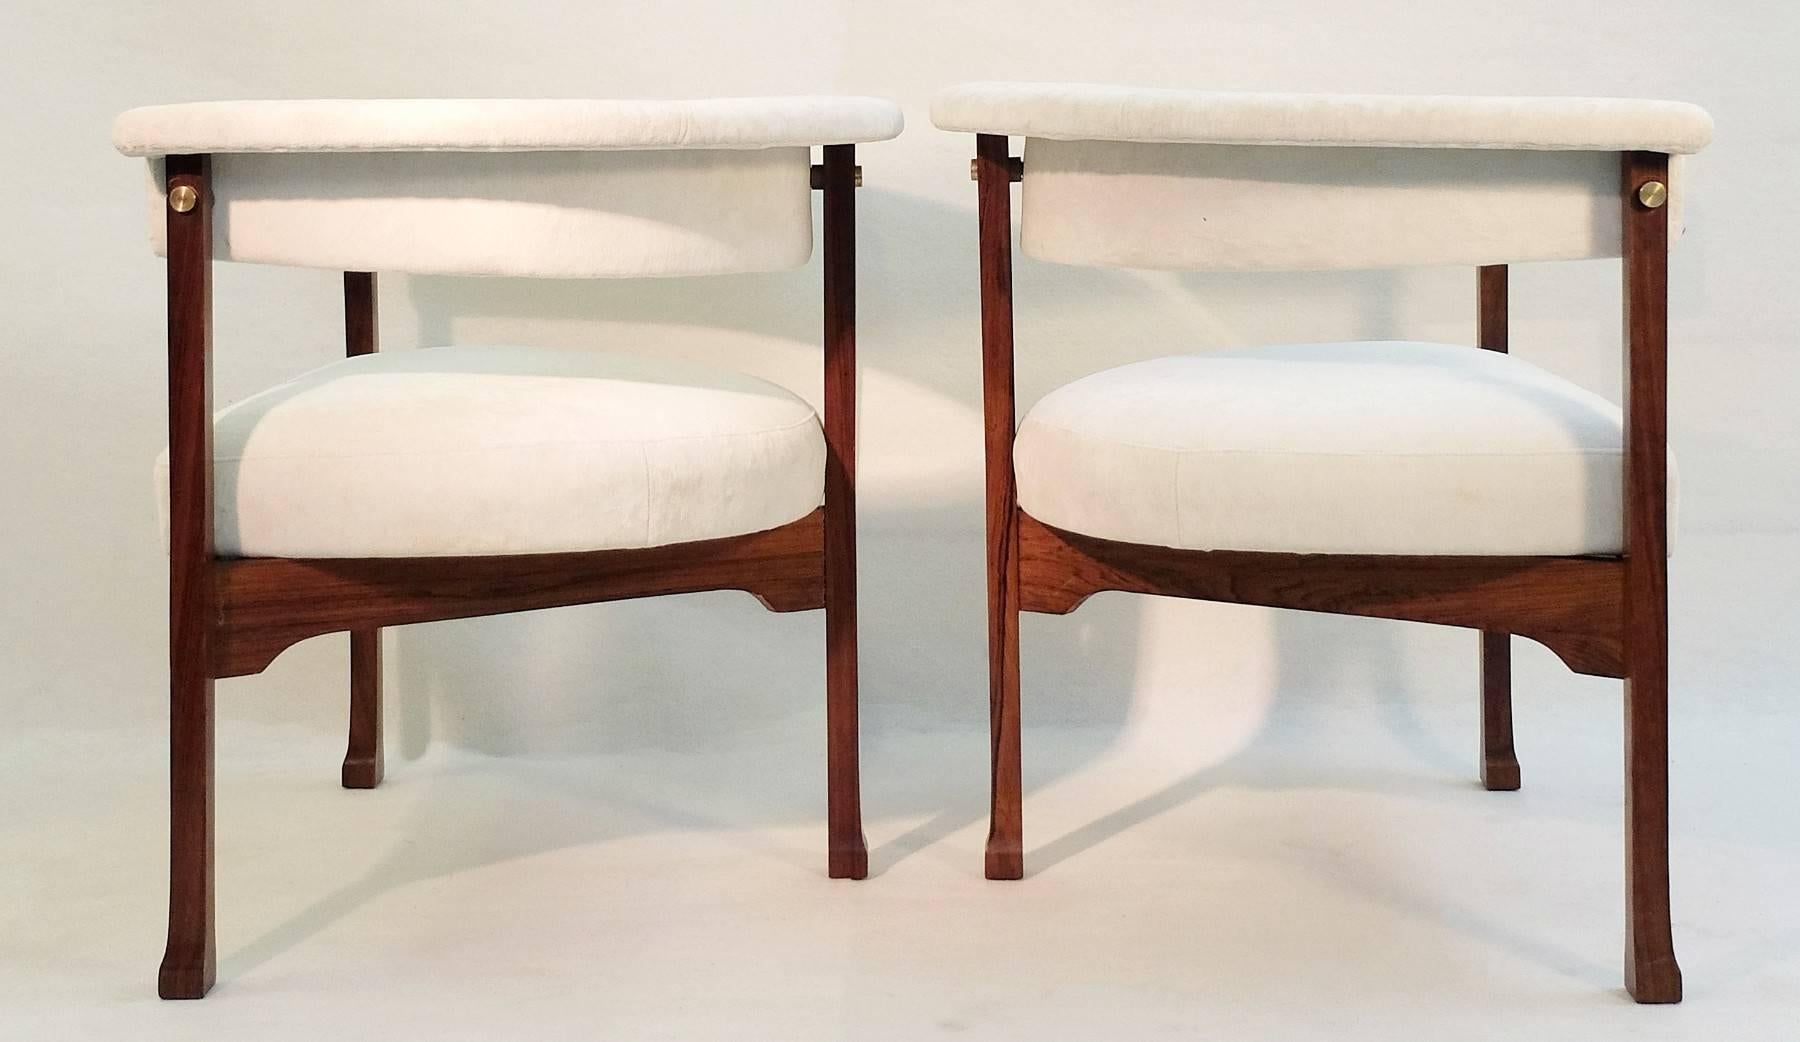 Pair of Saporiti armchairs from the 1960s, new upholstery.